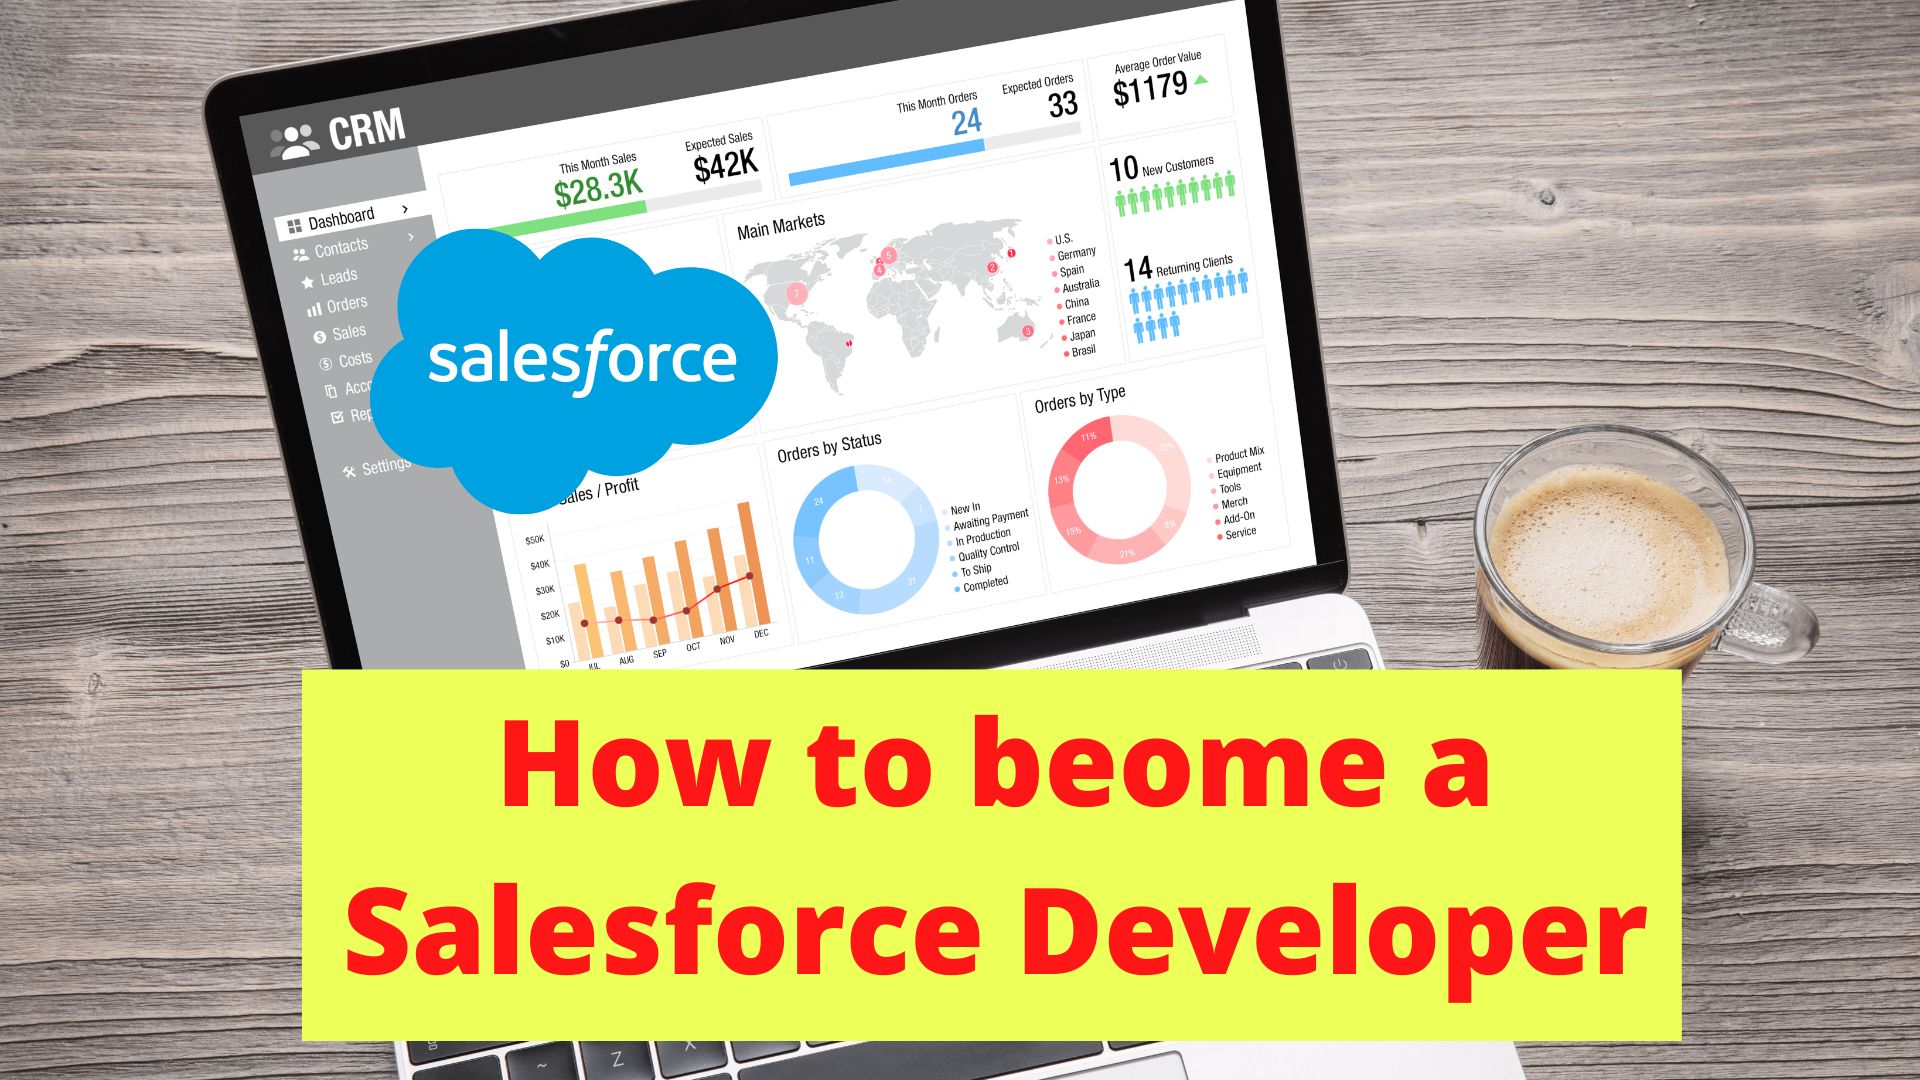 How to become a Salesforce Developer